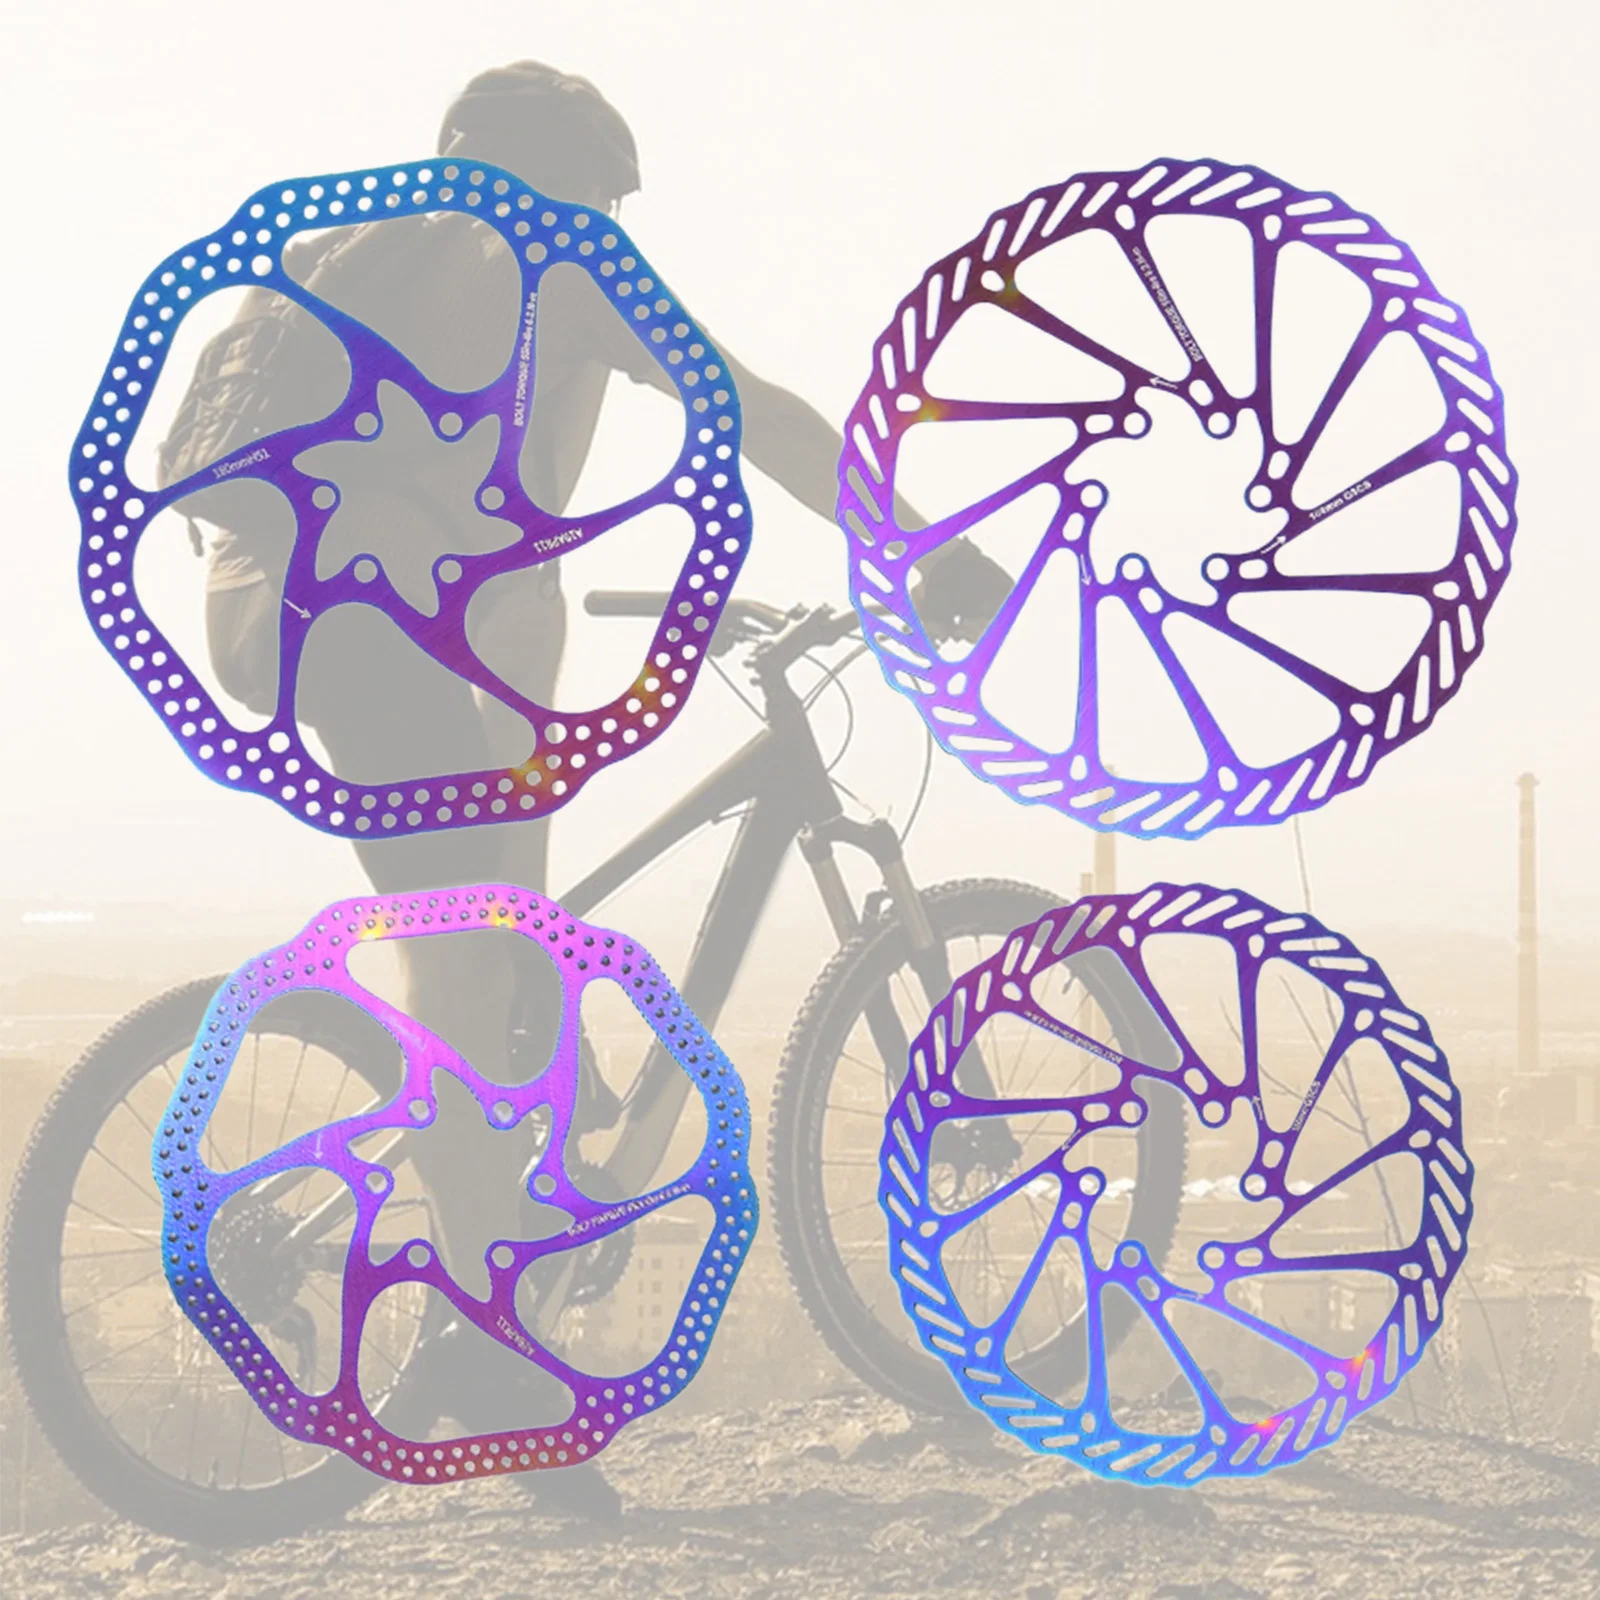 Bike Disc Brake Rotor Stainless Steel Bike Disc Brake Rotor w/6 Bolts for Most Bicycle Road Bike Mountain Bicycle Parts Accs